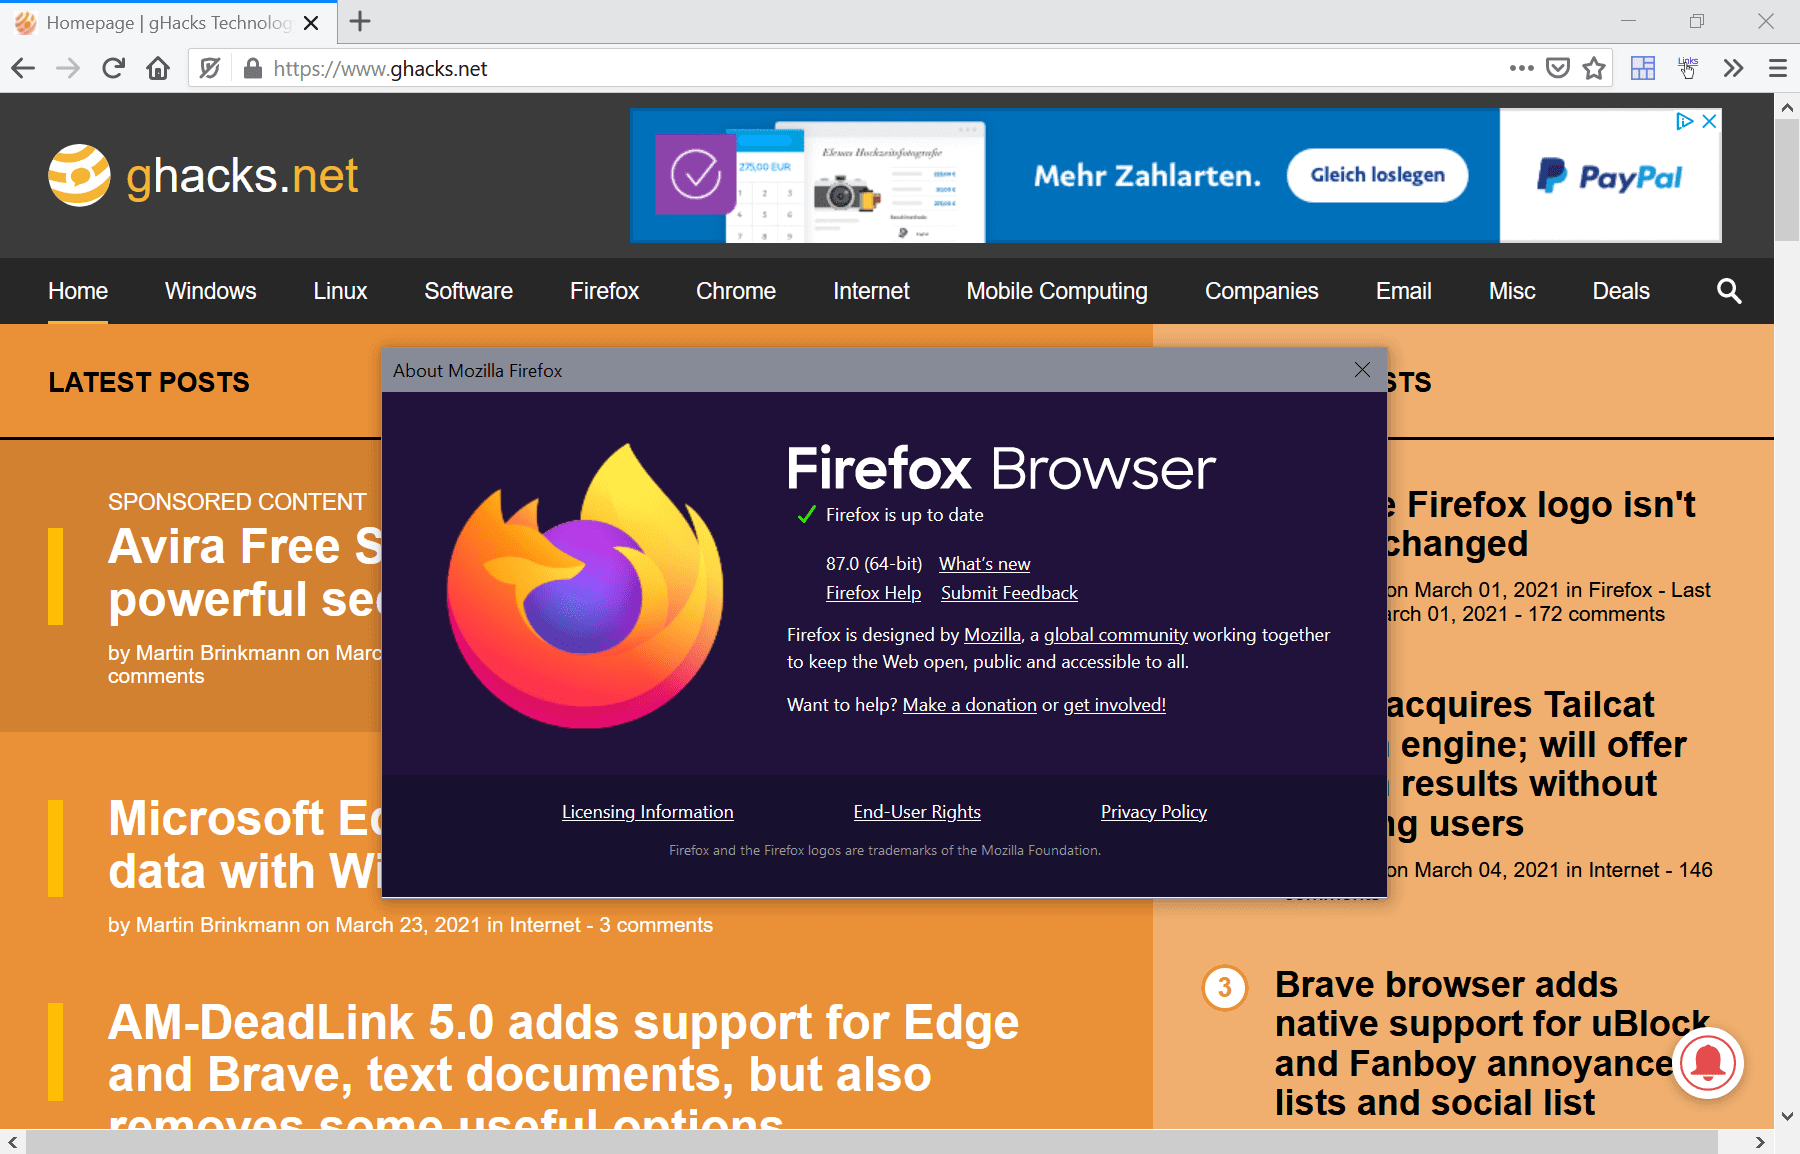 Here is what is new and changed in Firefox 87.0